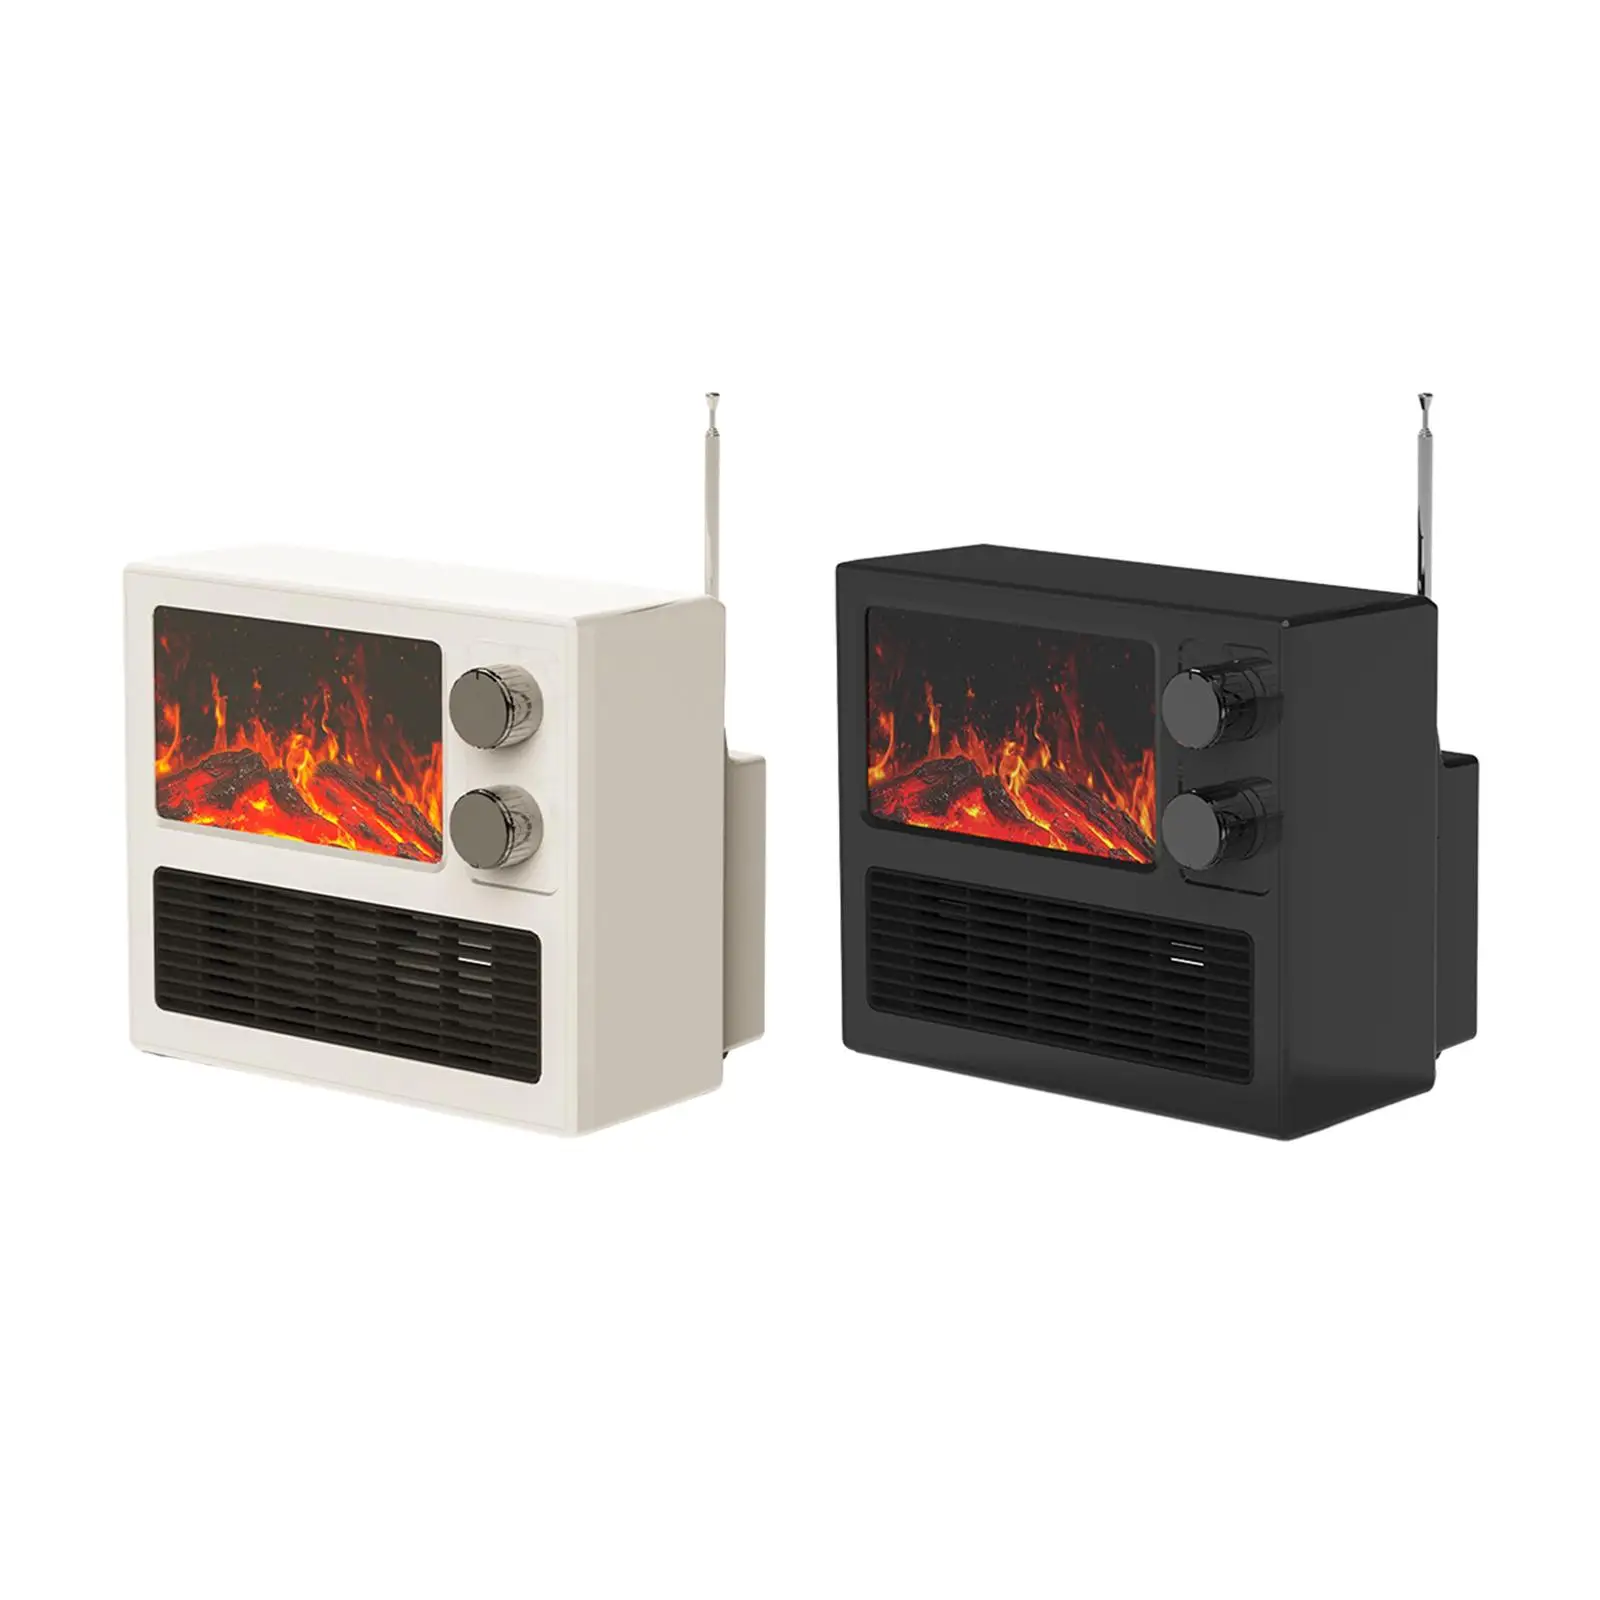 Electric Fireplace Tabletop Room Heater for Dorm Bedroom Living Room